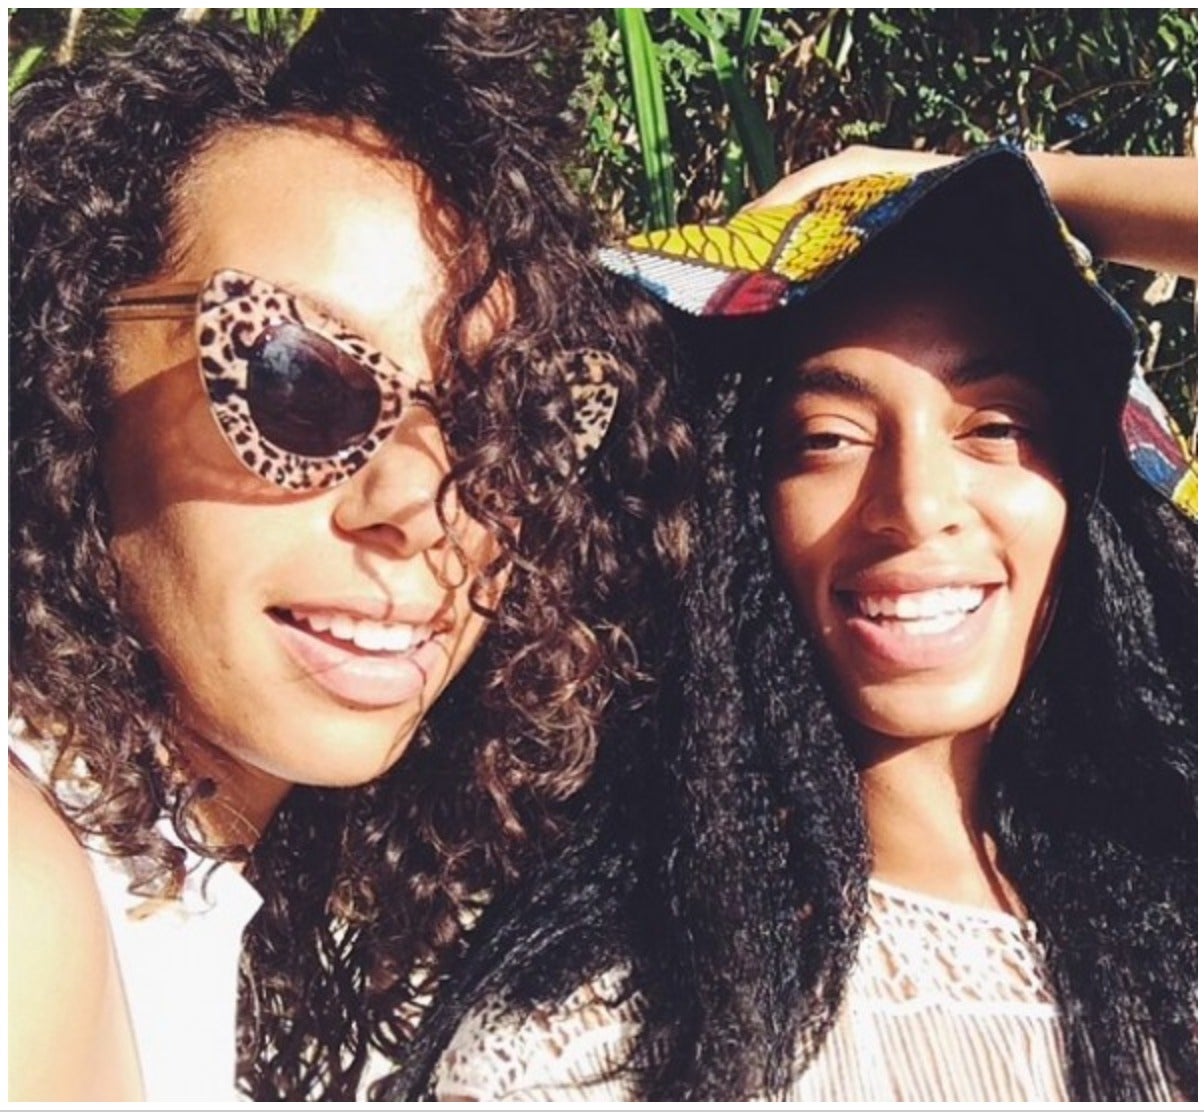 See Beyonce and Solange's Jamaican Vacay
